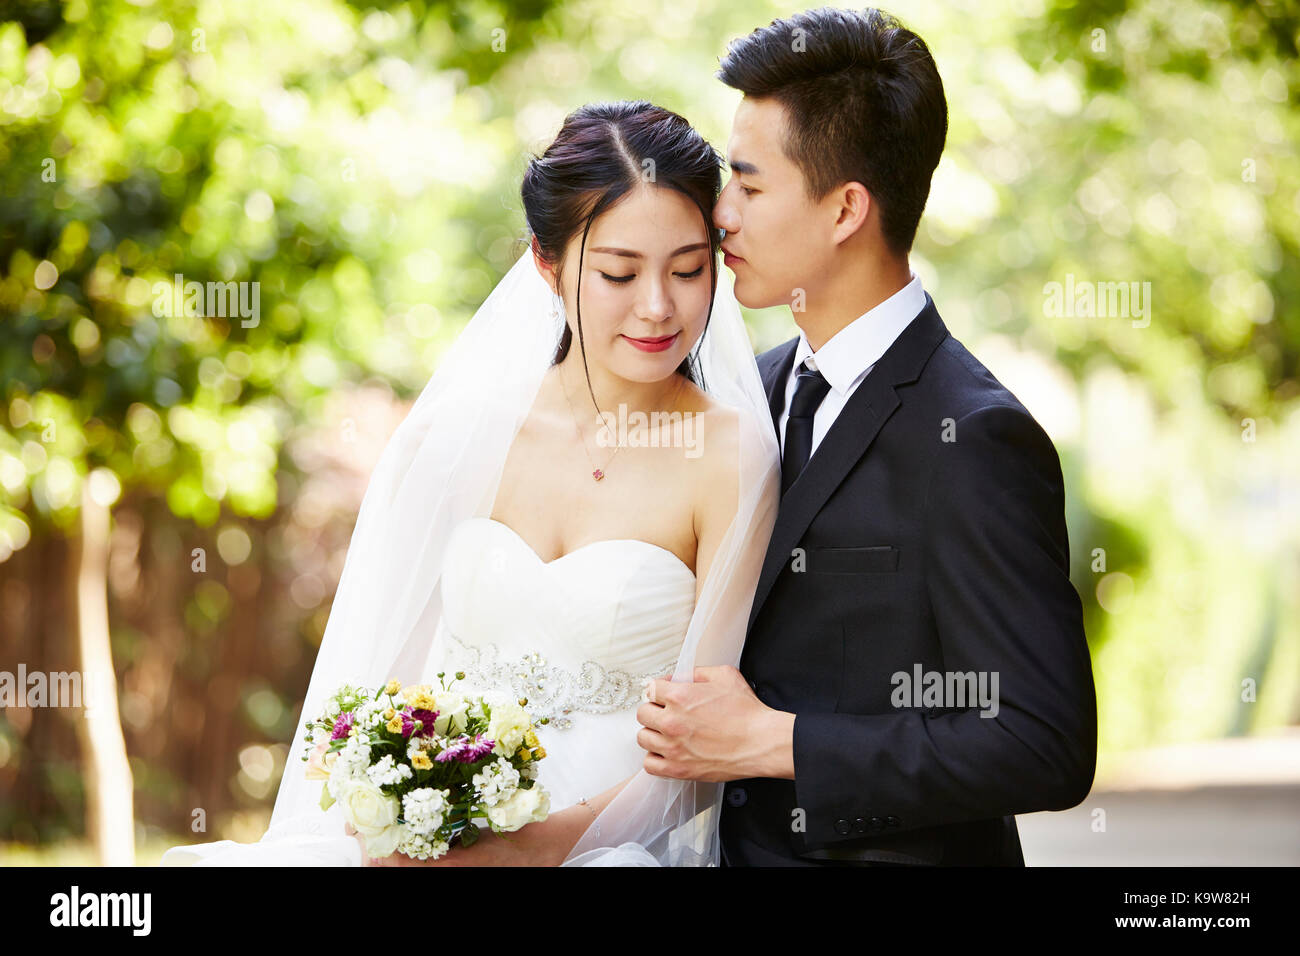 young asian groom kissing bride outdoors during wedding ceremony. Stock Photo